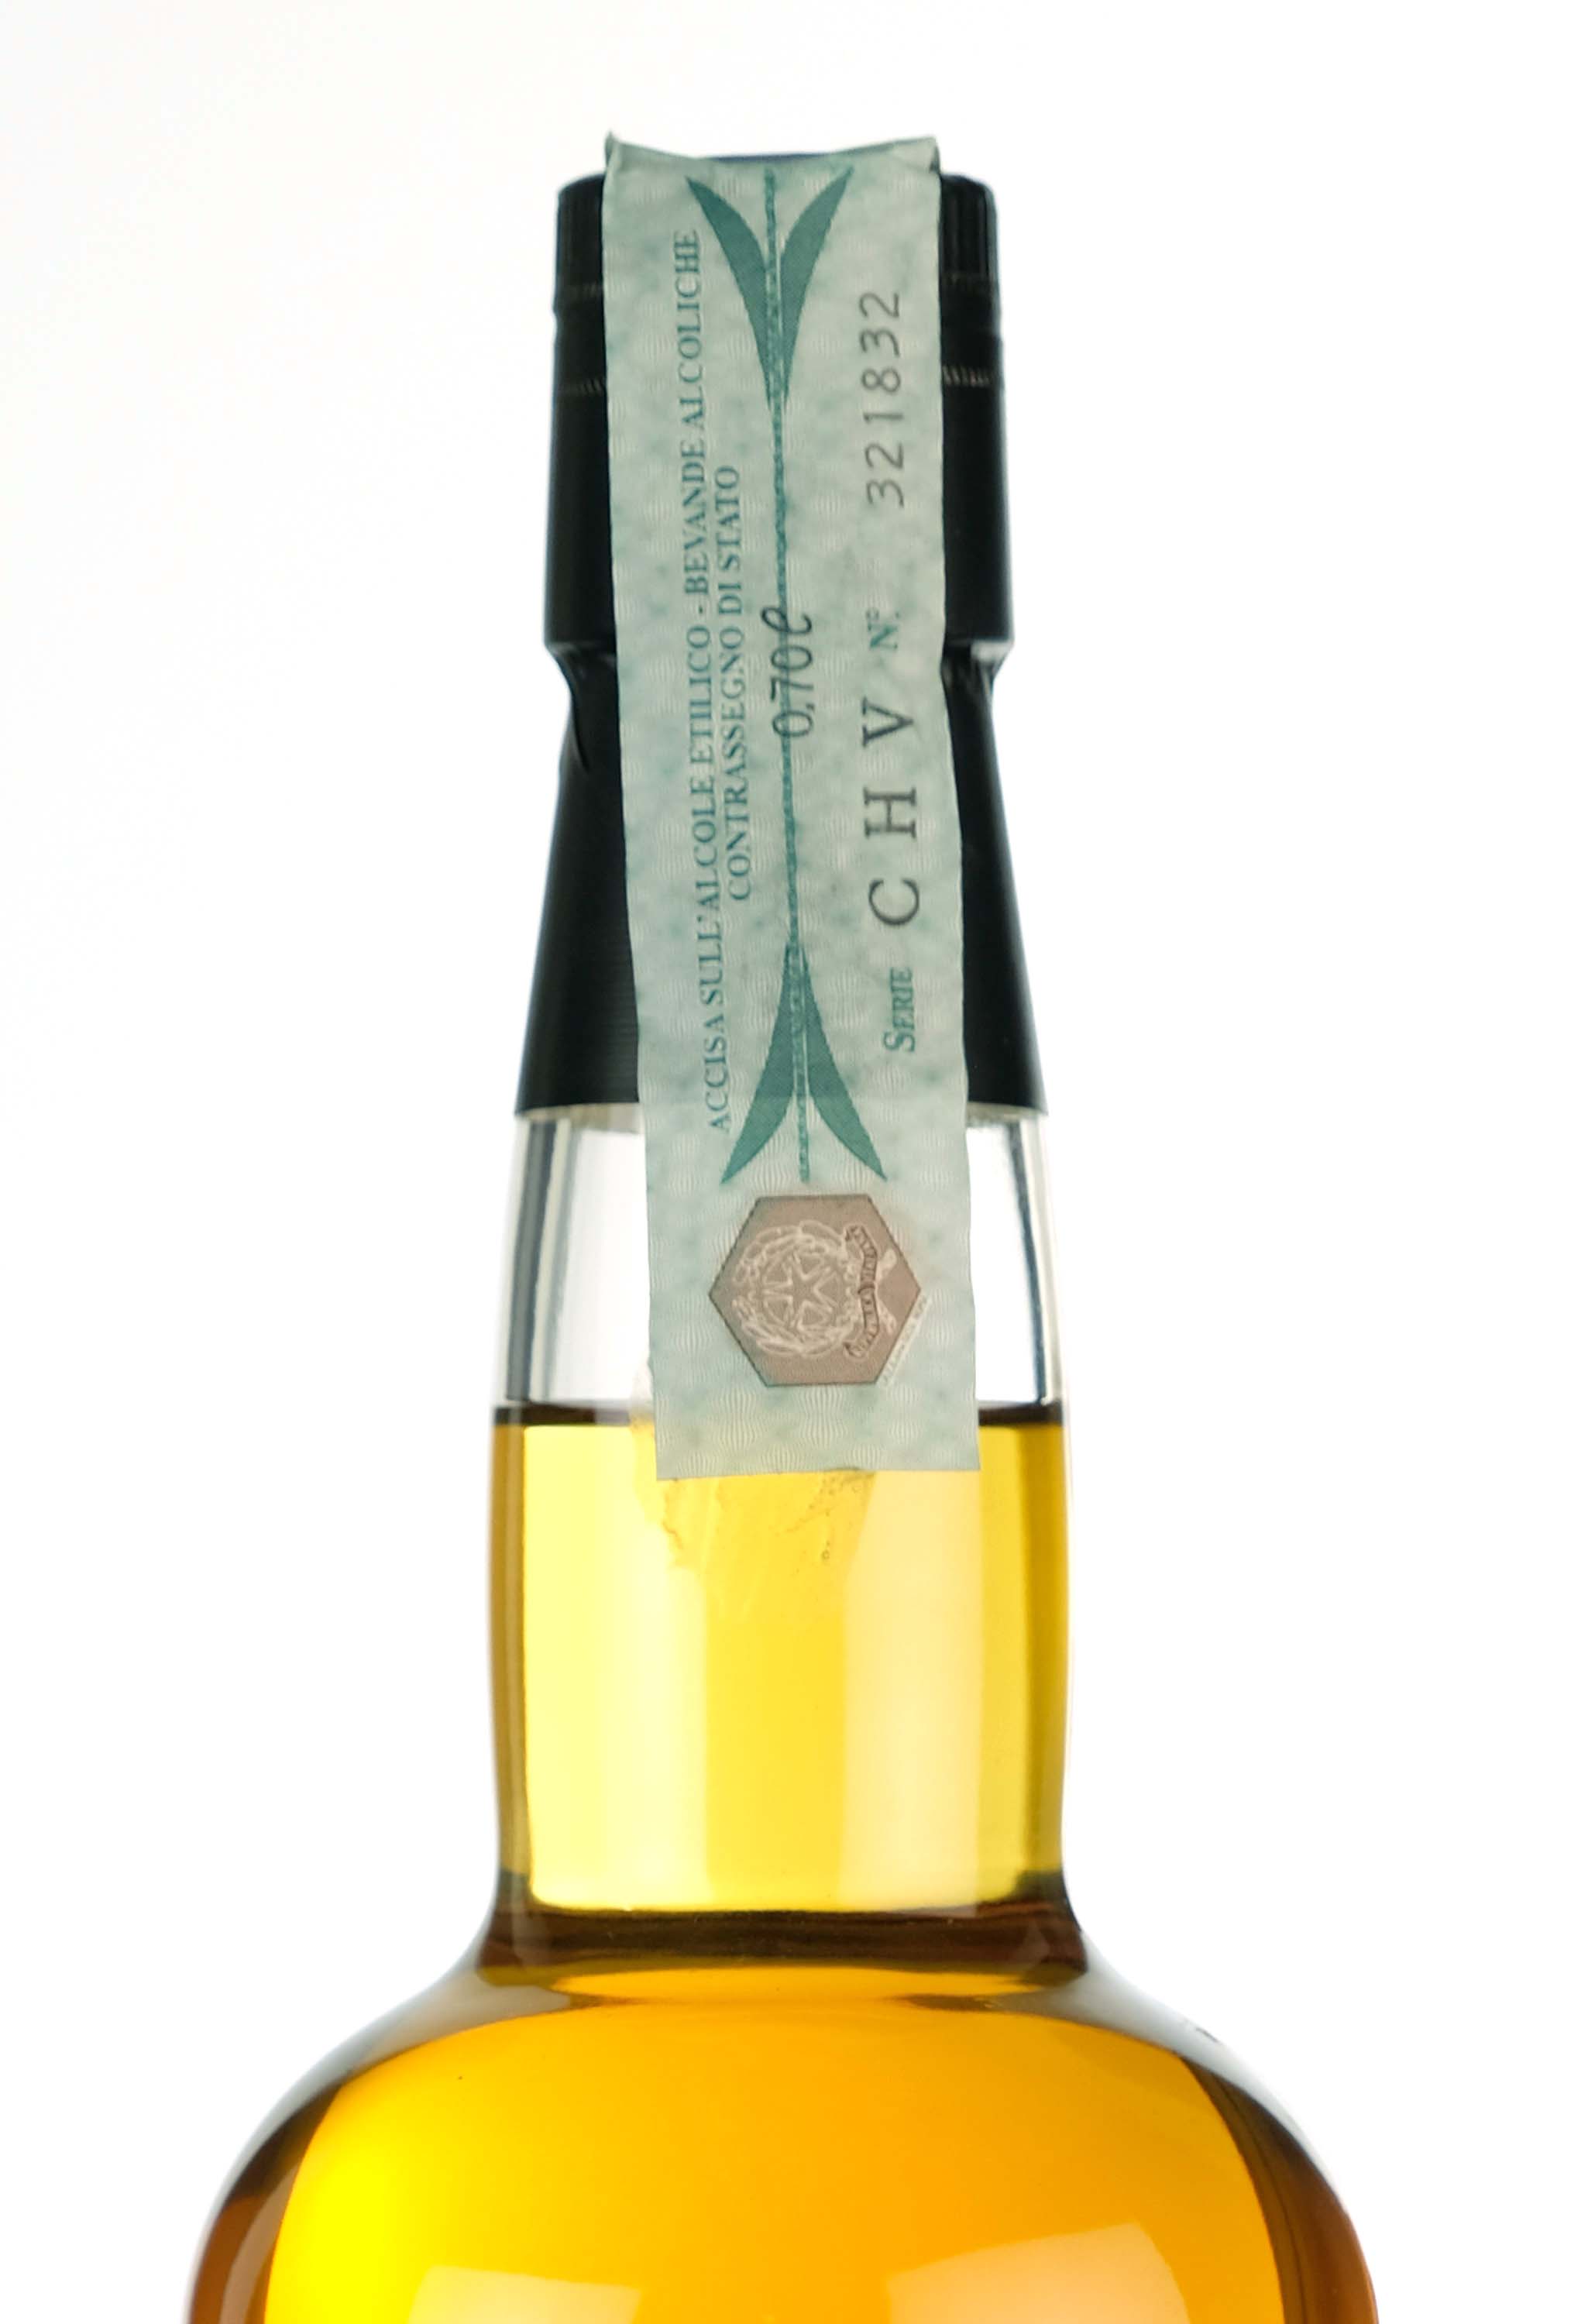 North British 1978-2014 - 35 Year Old - Duncan Taylor - Rare Auld - Single Cask 39900